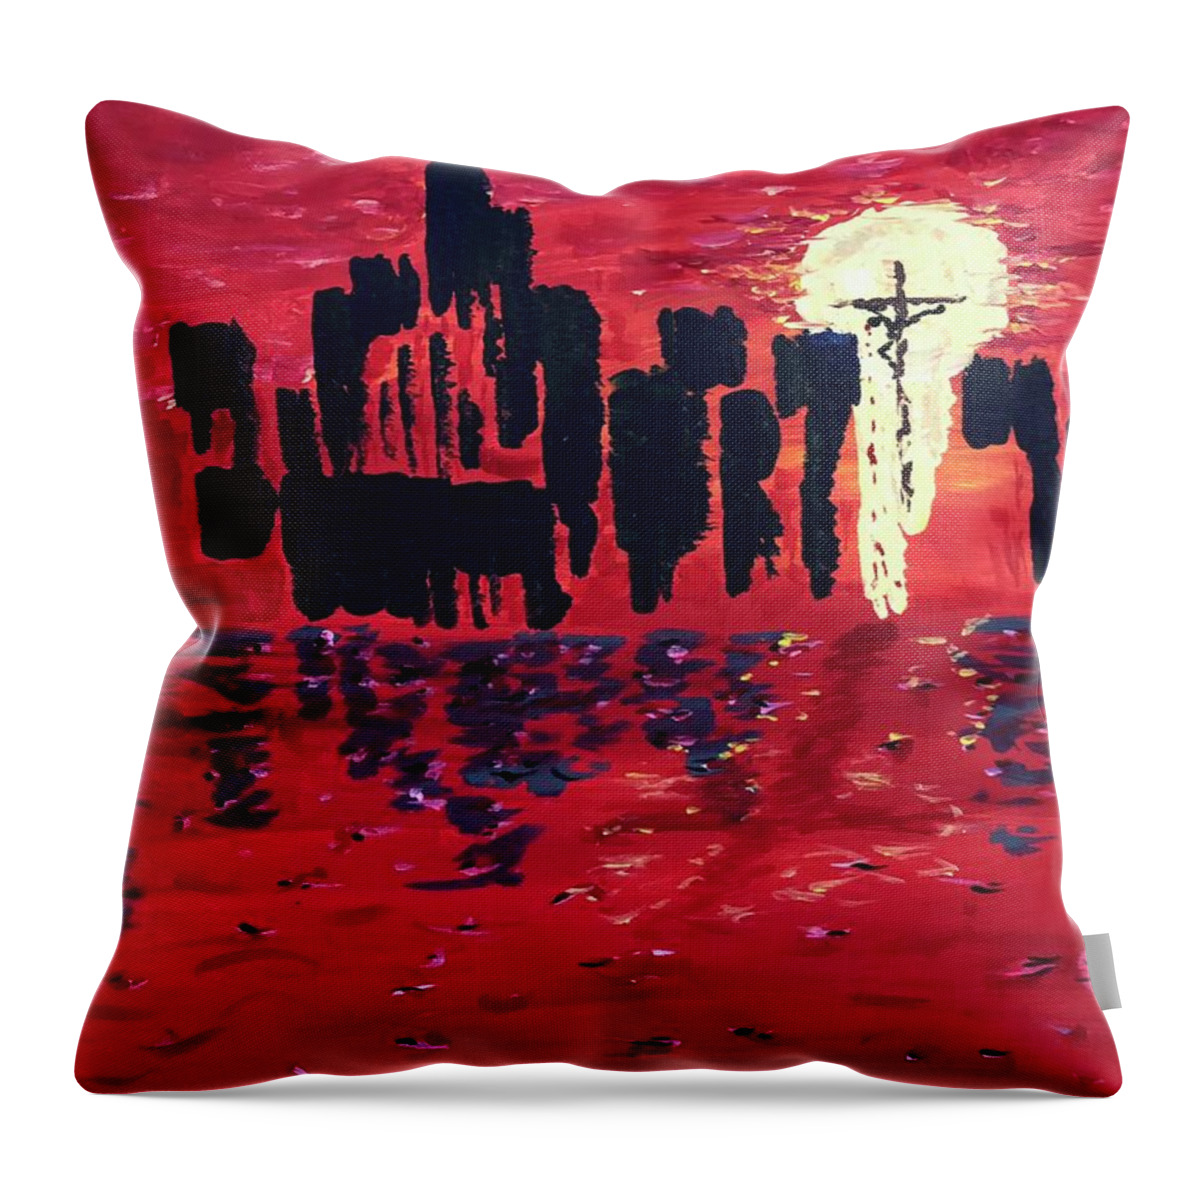 Dawn Throw Pillow featuring the painting Scape by Bethany Beeler